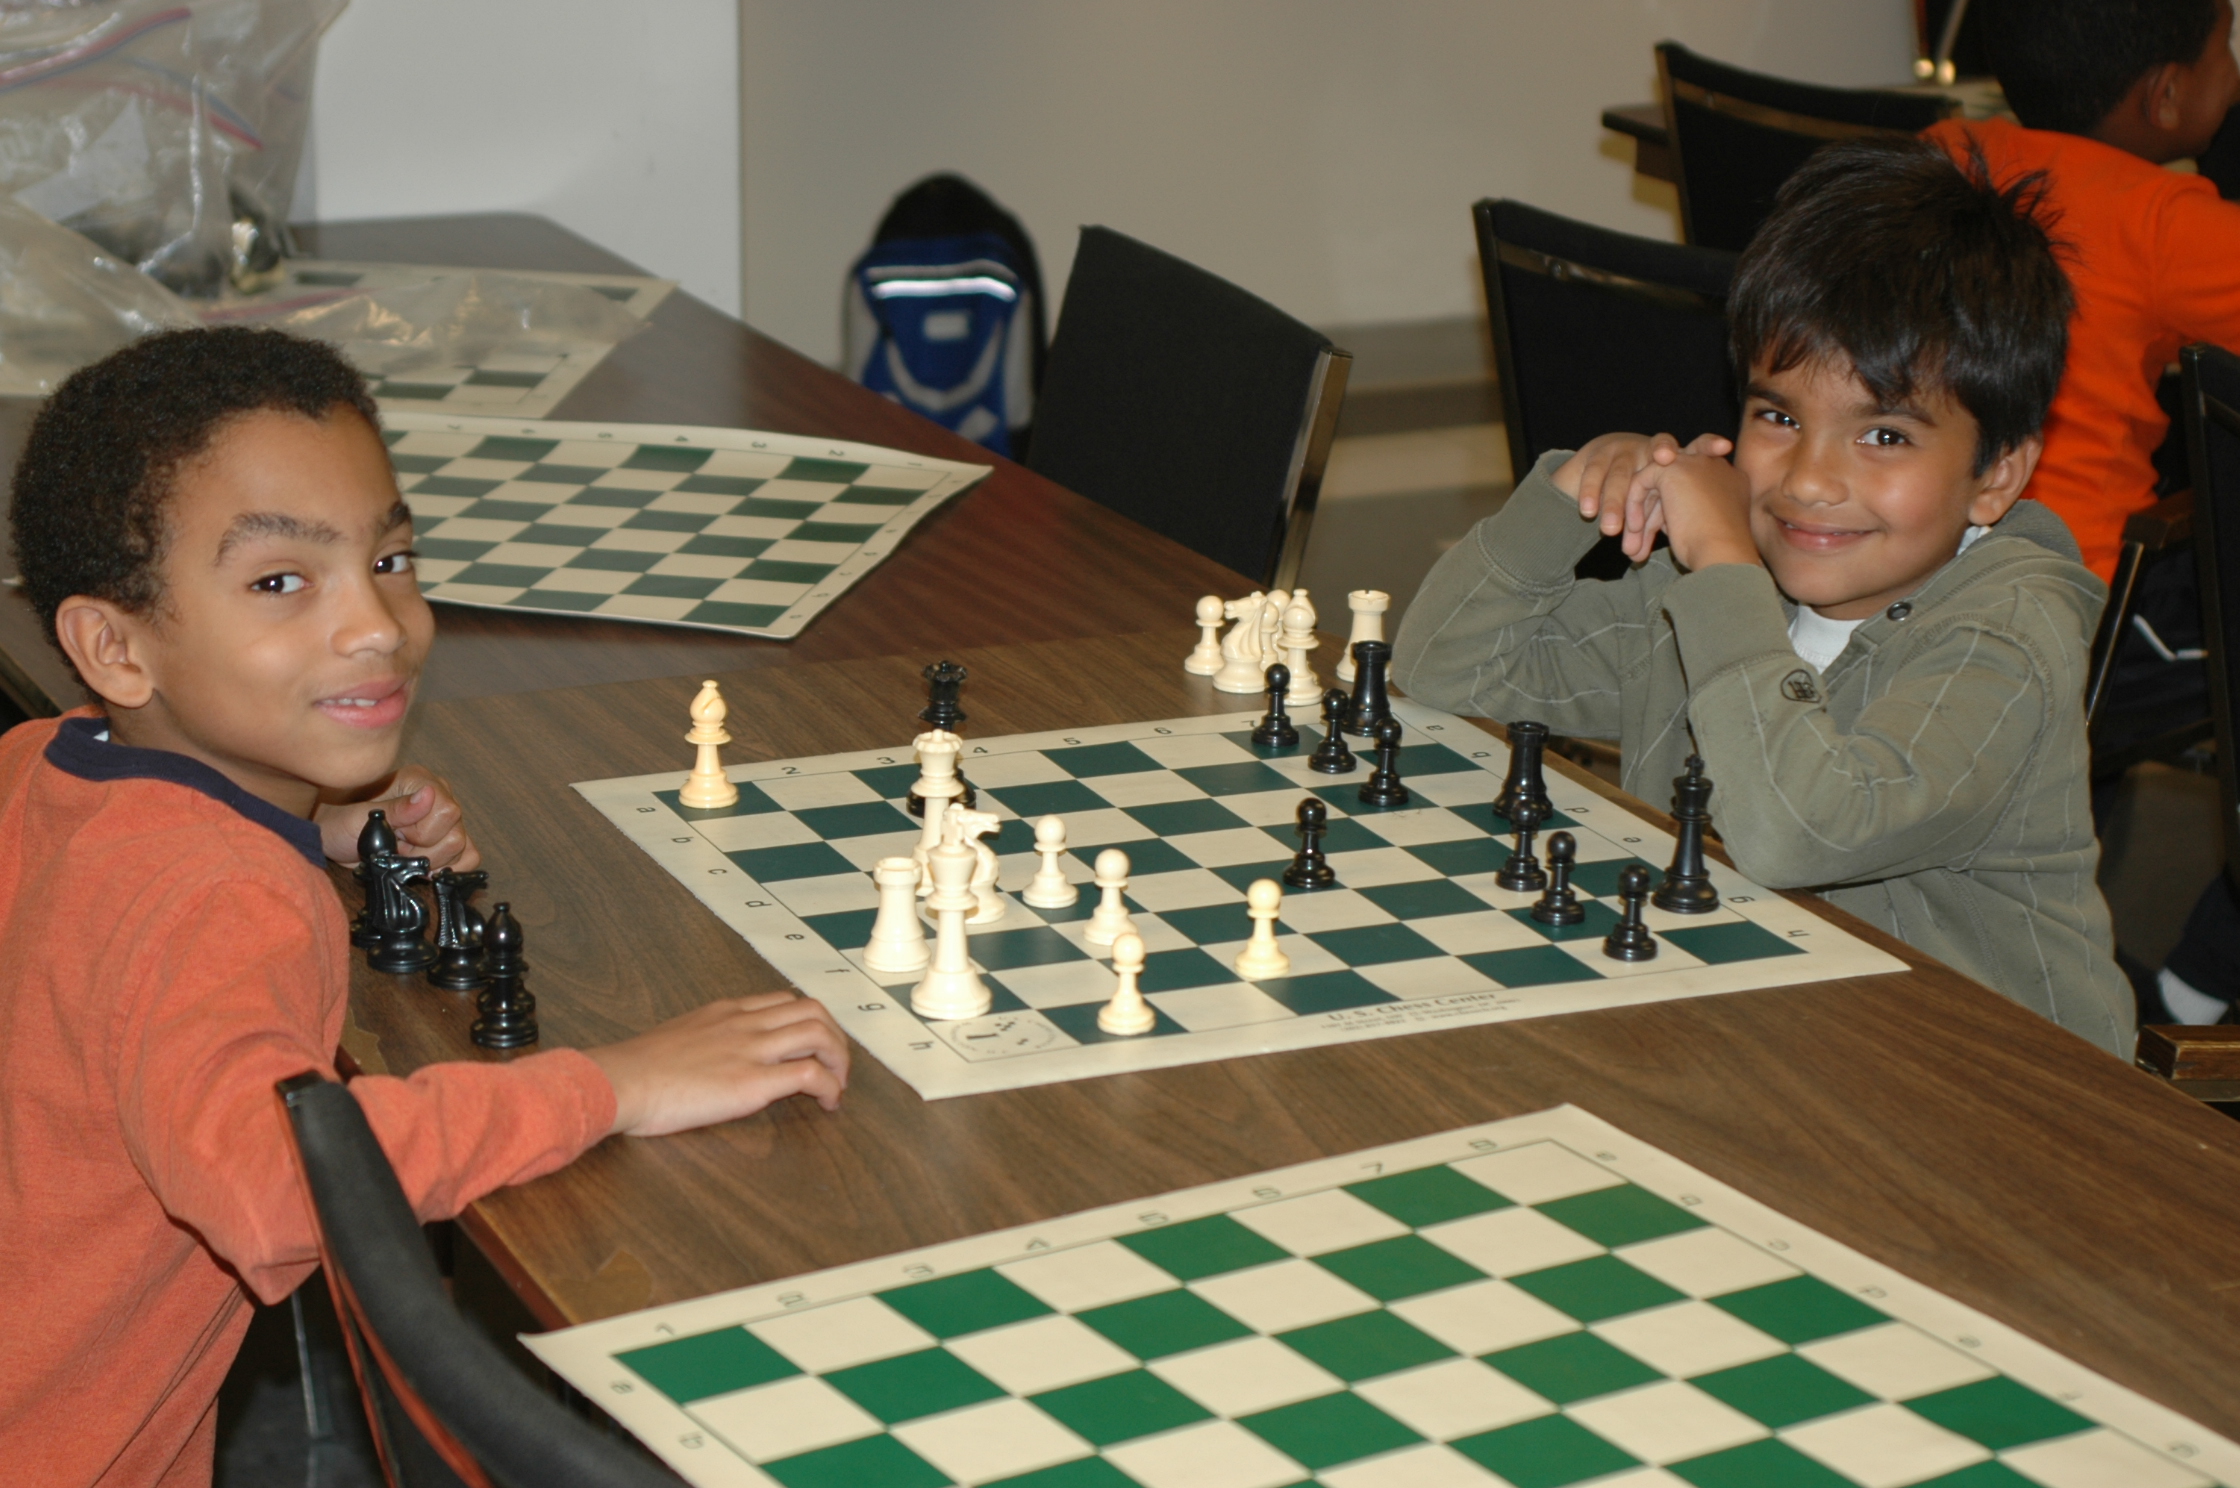 youth chess club near me Elden Morrissey